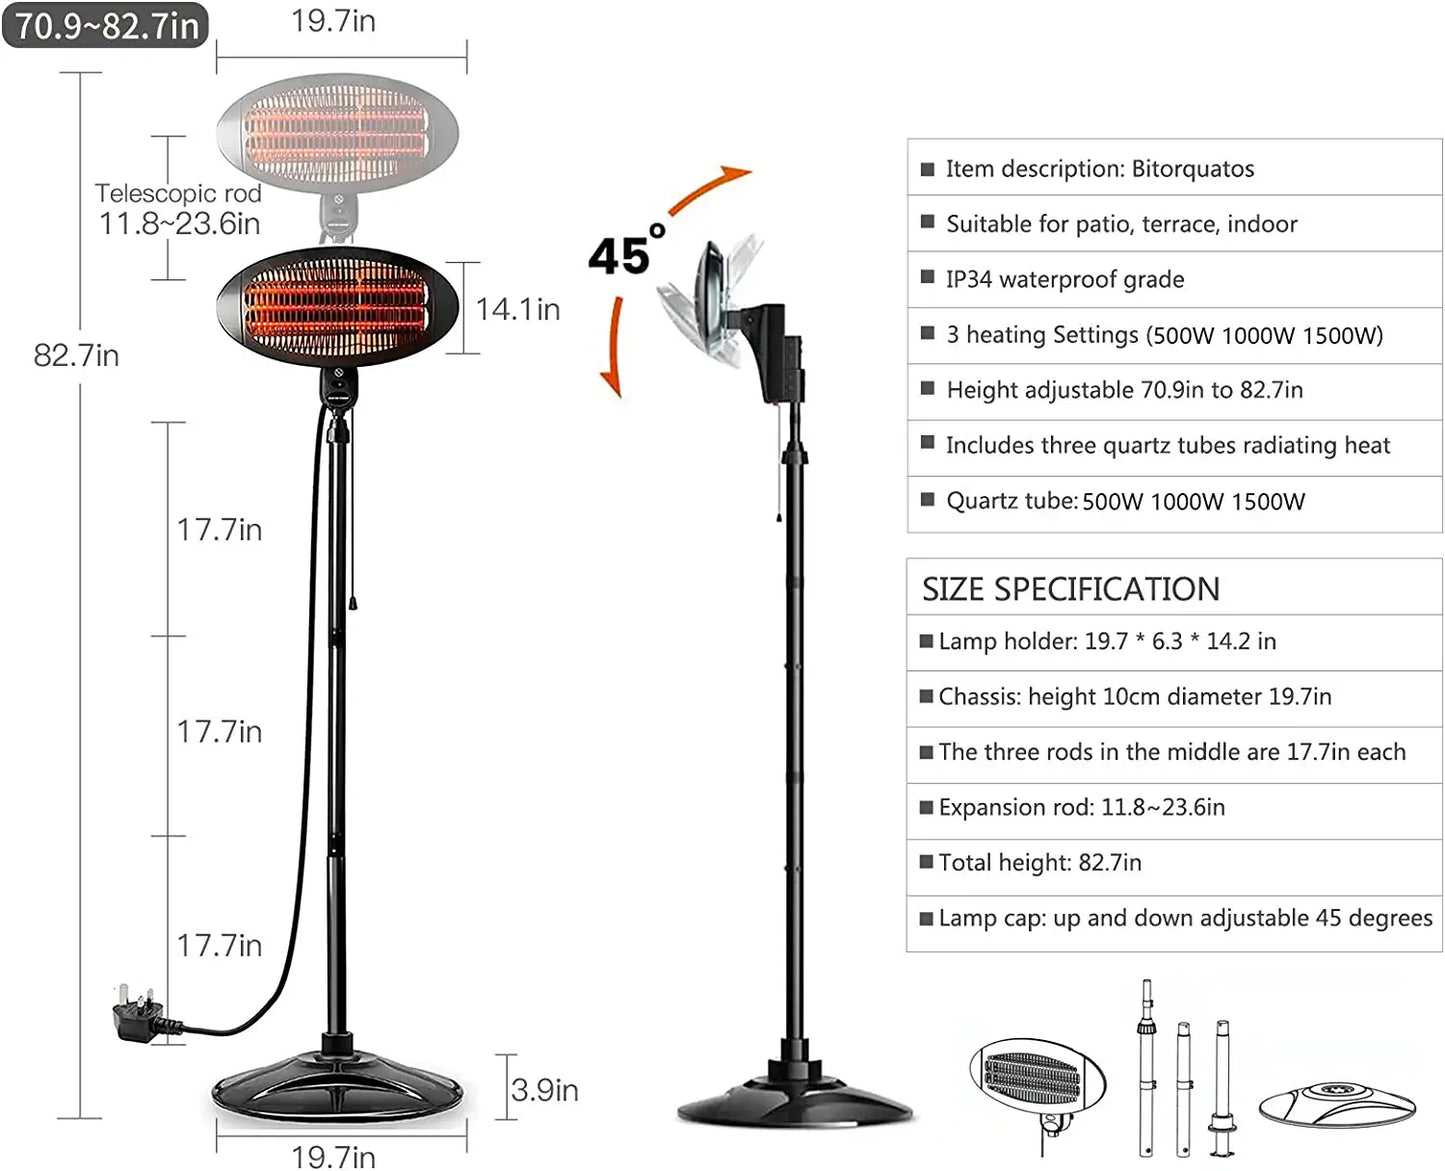 Portable Patio Electric Heater, Indoor and Outdoor, Raised and Lowered, 500W/1000W/1500W, Quiet, Automatic Power off (Black)